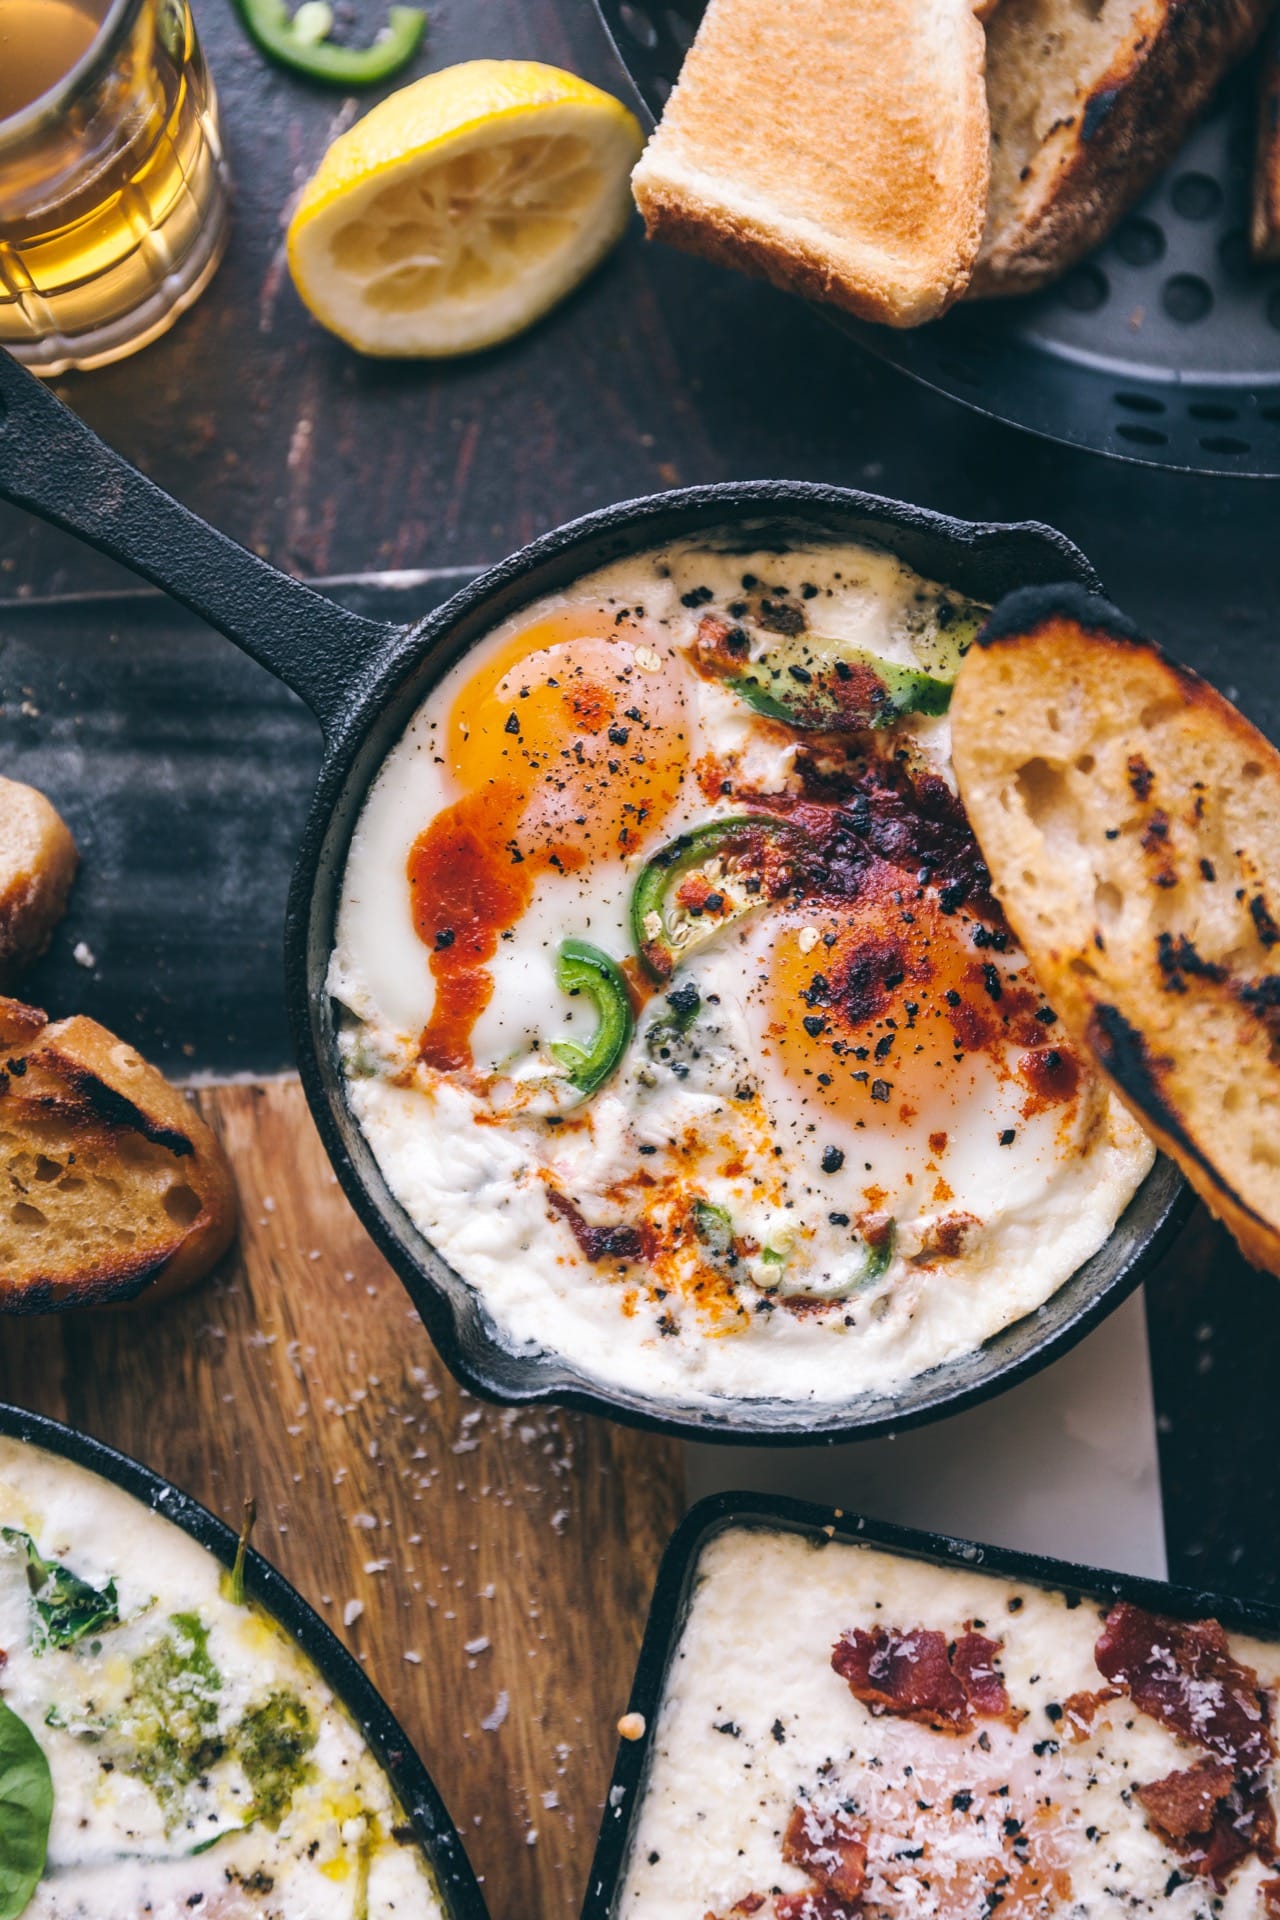 Spicy Jalapeno Avocado Baked Eggs #food photography #foodstyling #bakedeggs #eggs